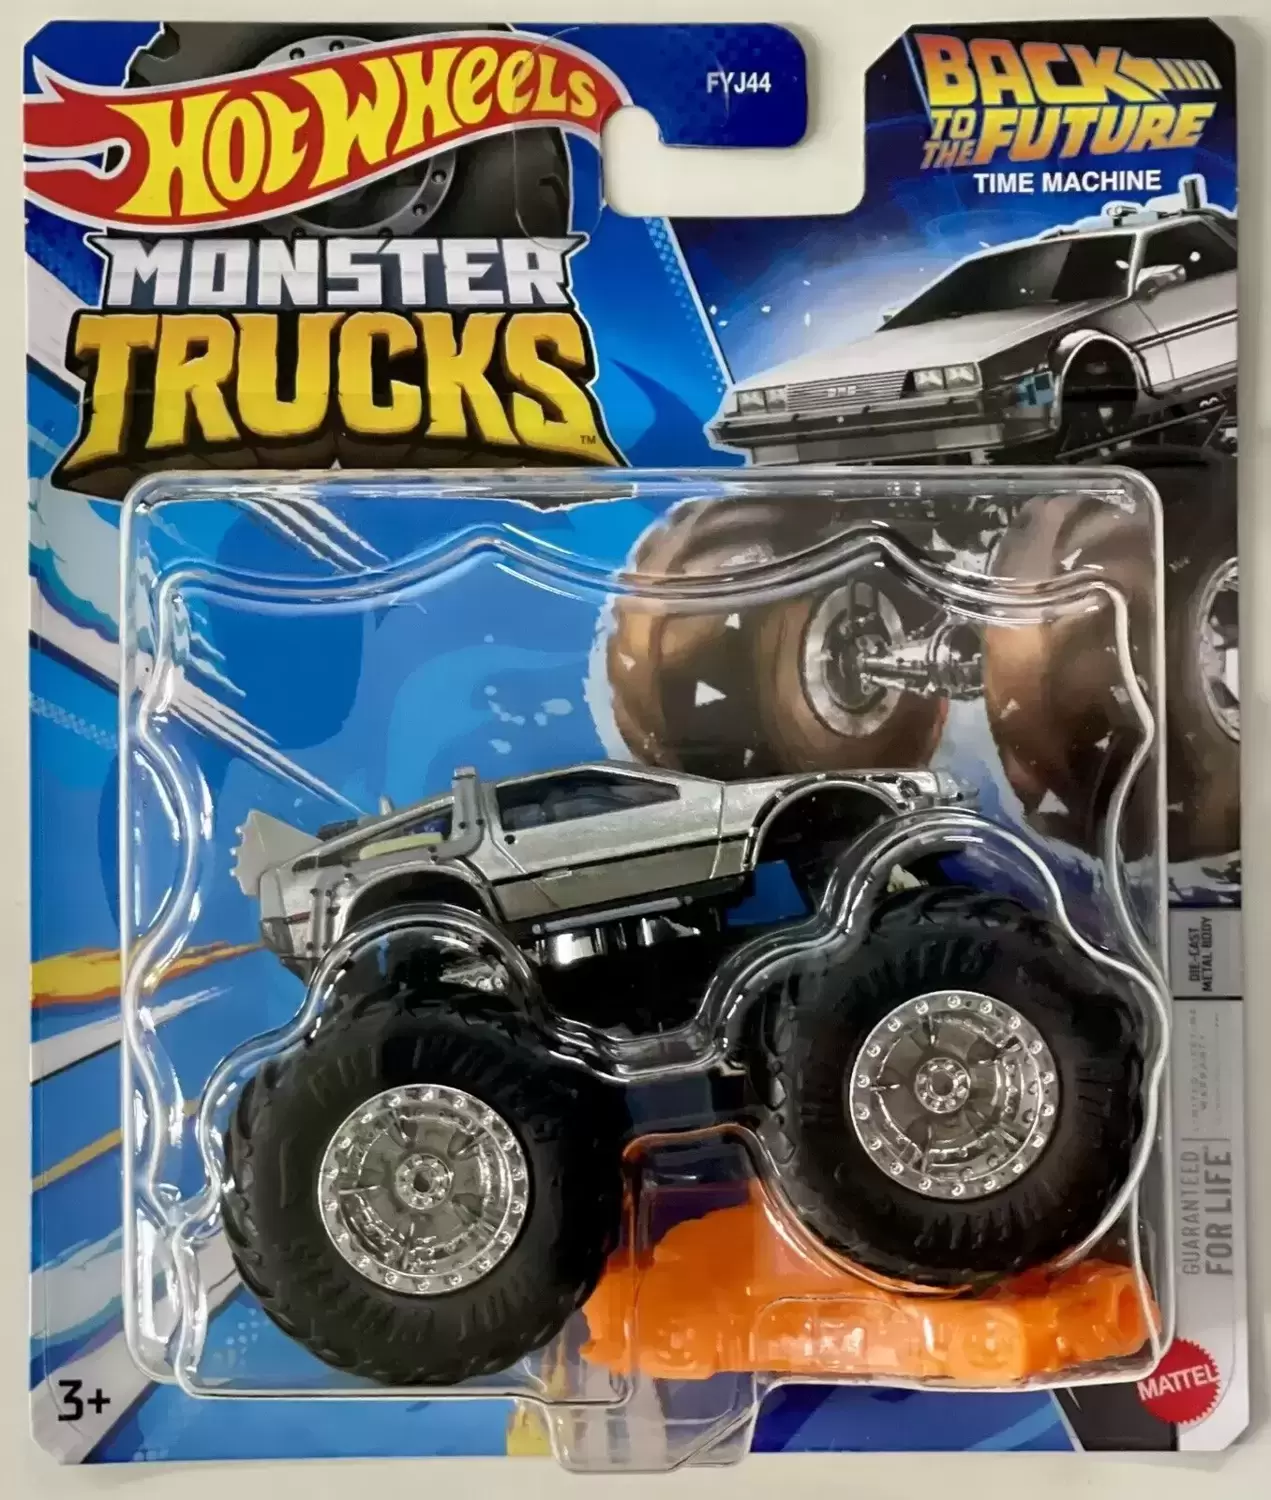 Monster Trucks - Back to the Future - Time Machine